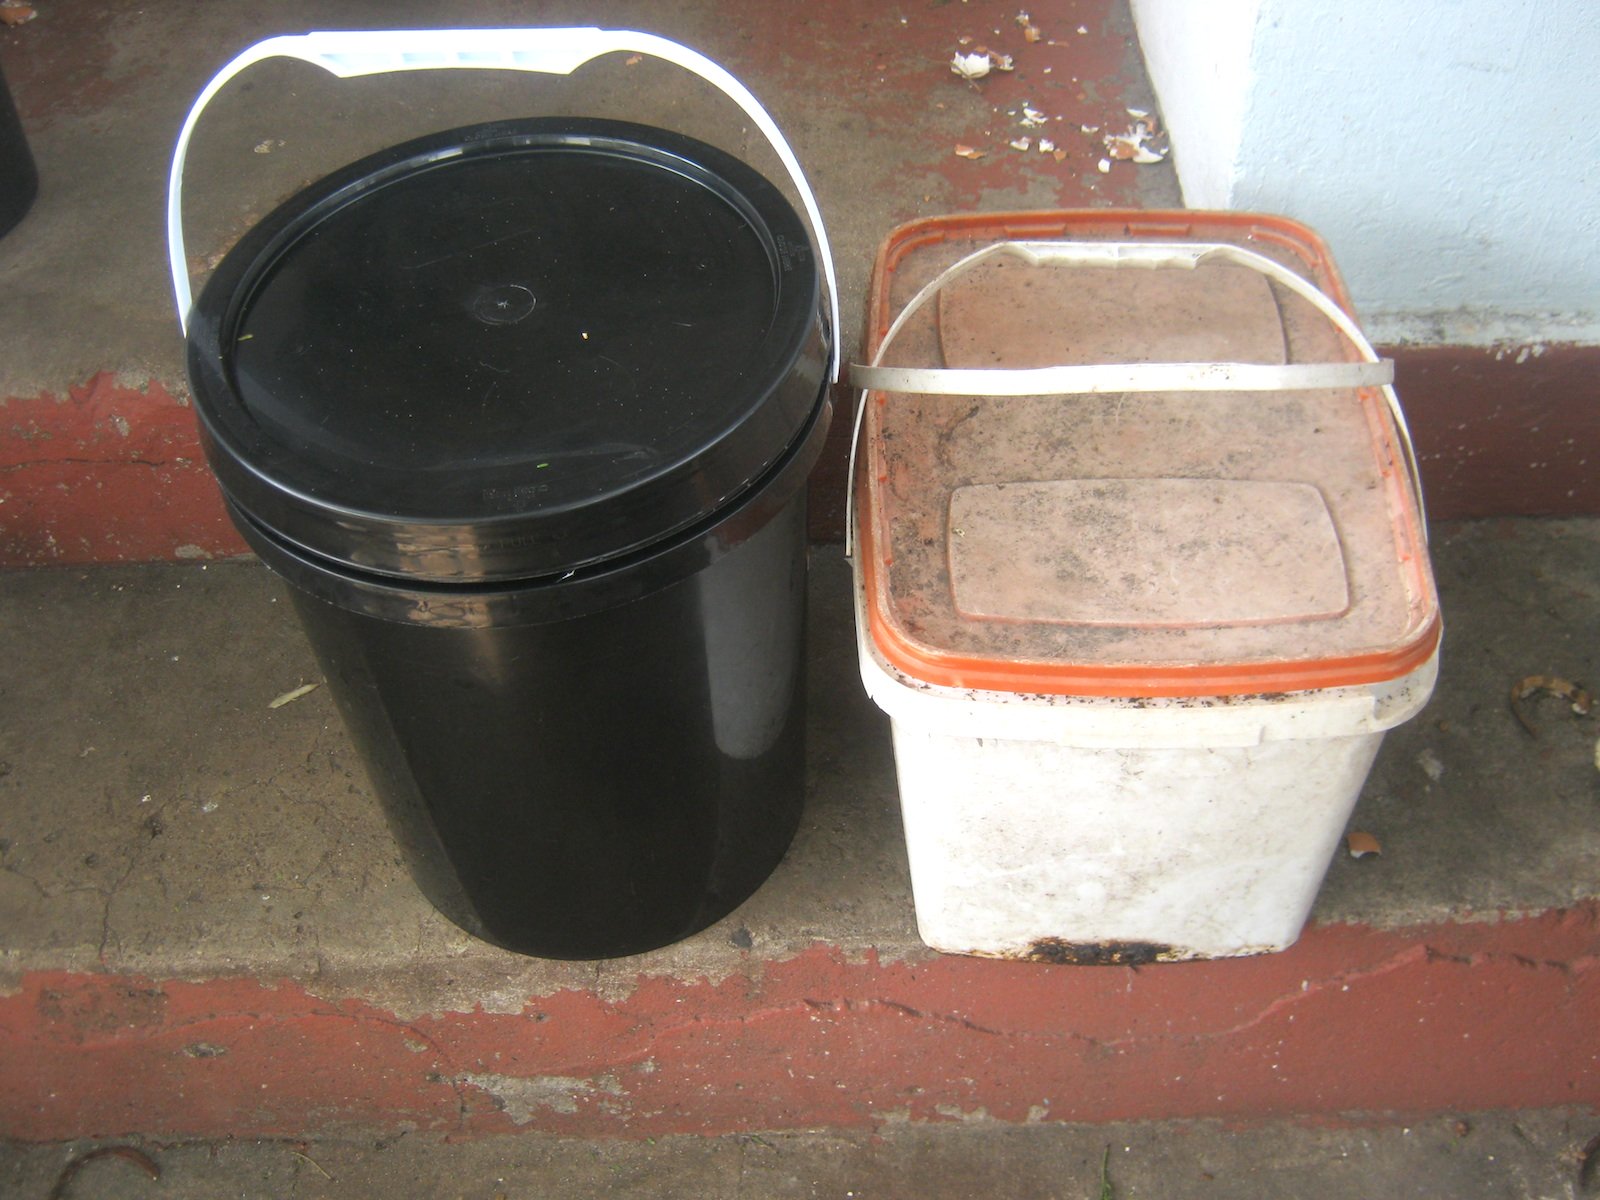 2 very basic worm bins. The white one has been in use for years.